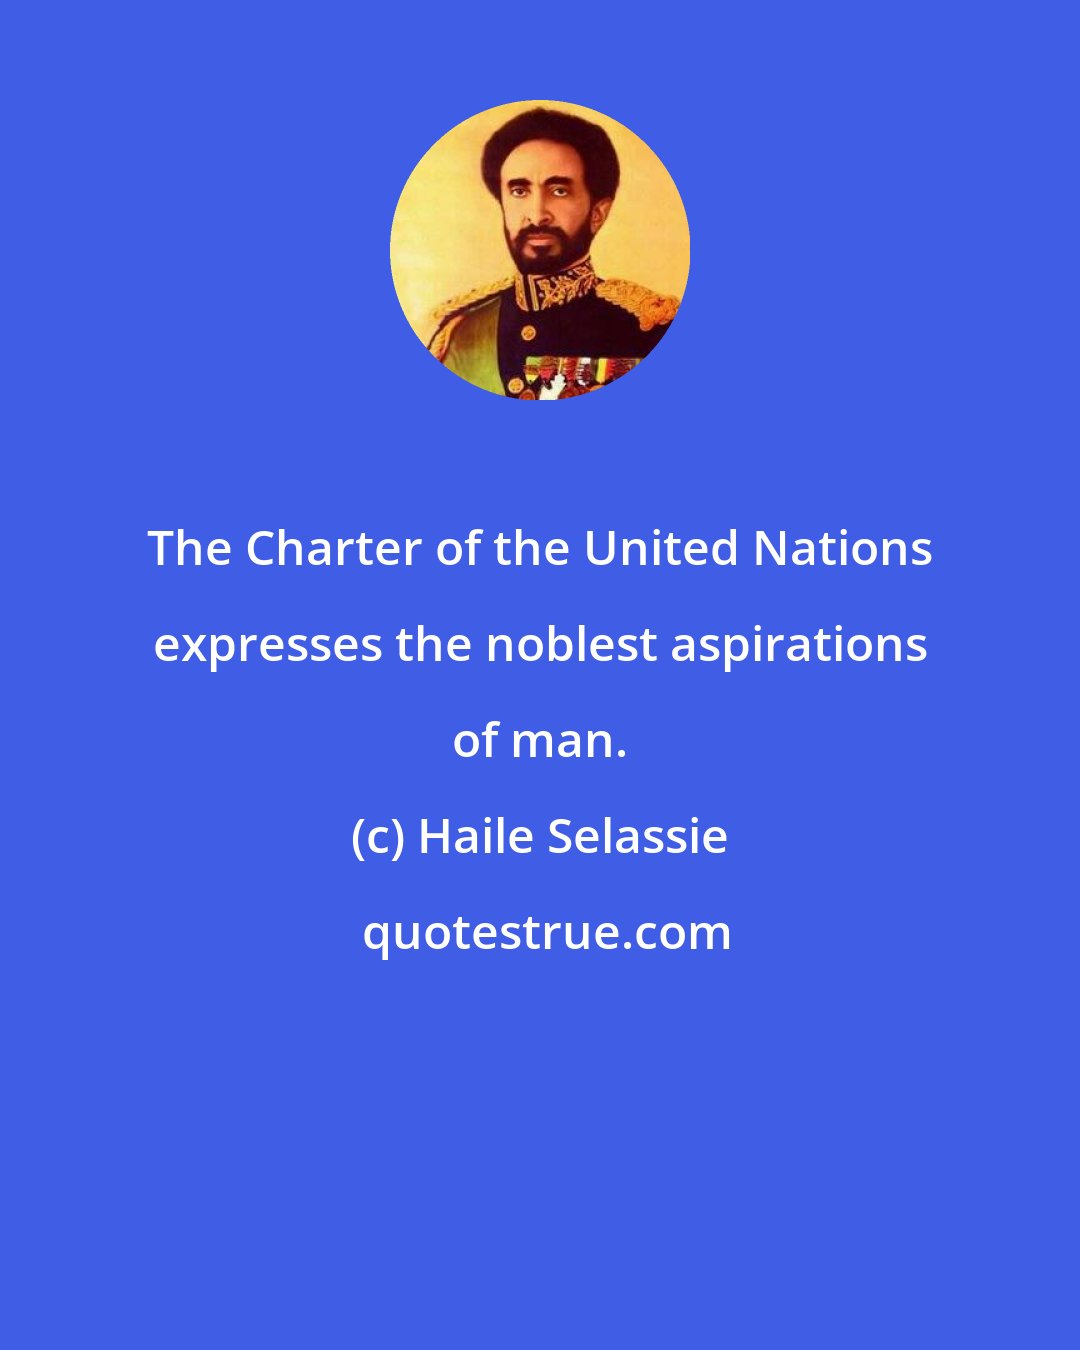 Haile Selassie: The Charter of the United Nations expresses the noblest aspirations of man.